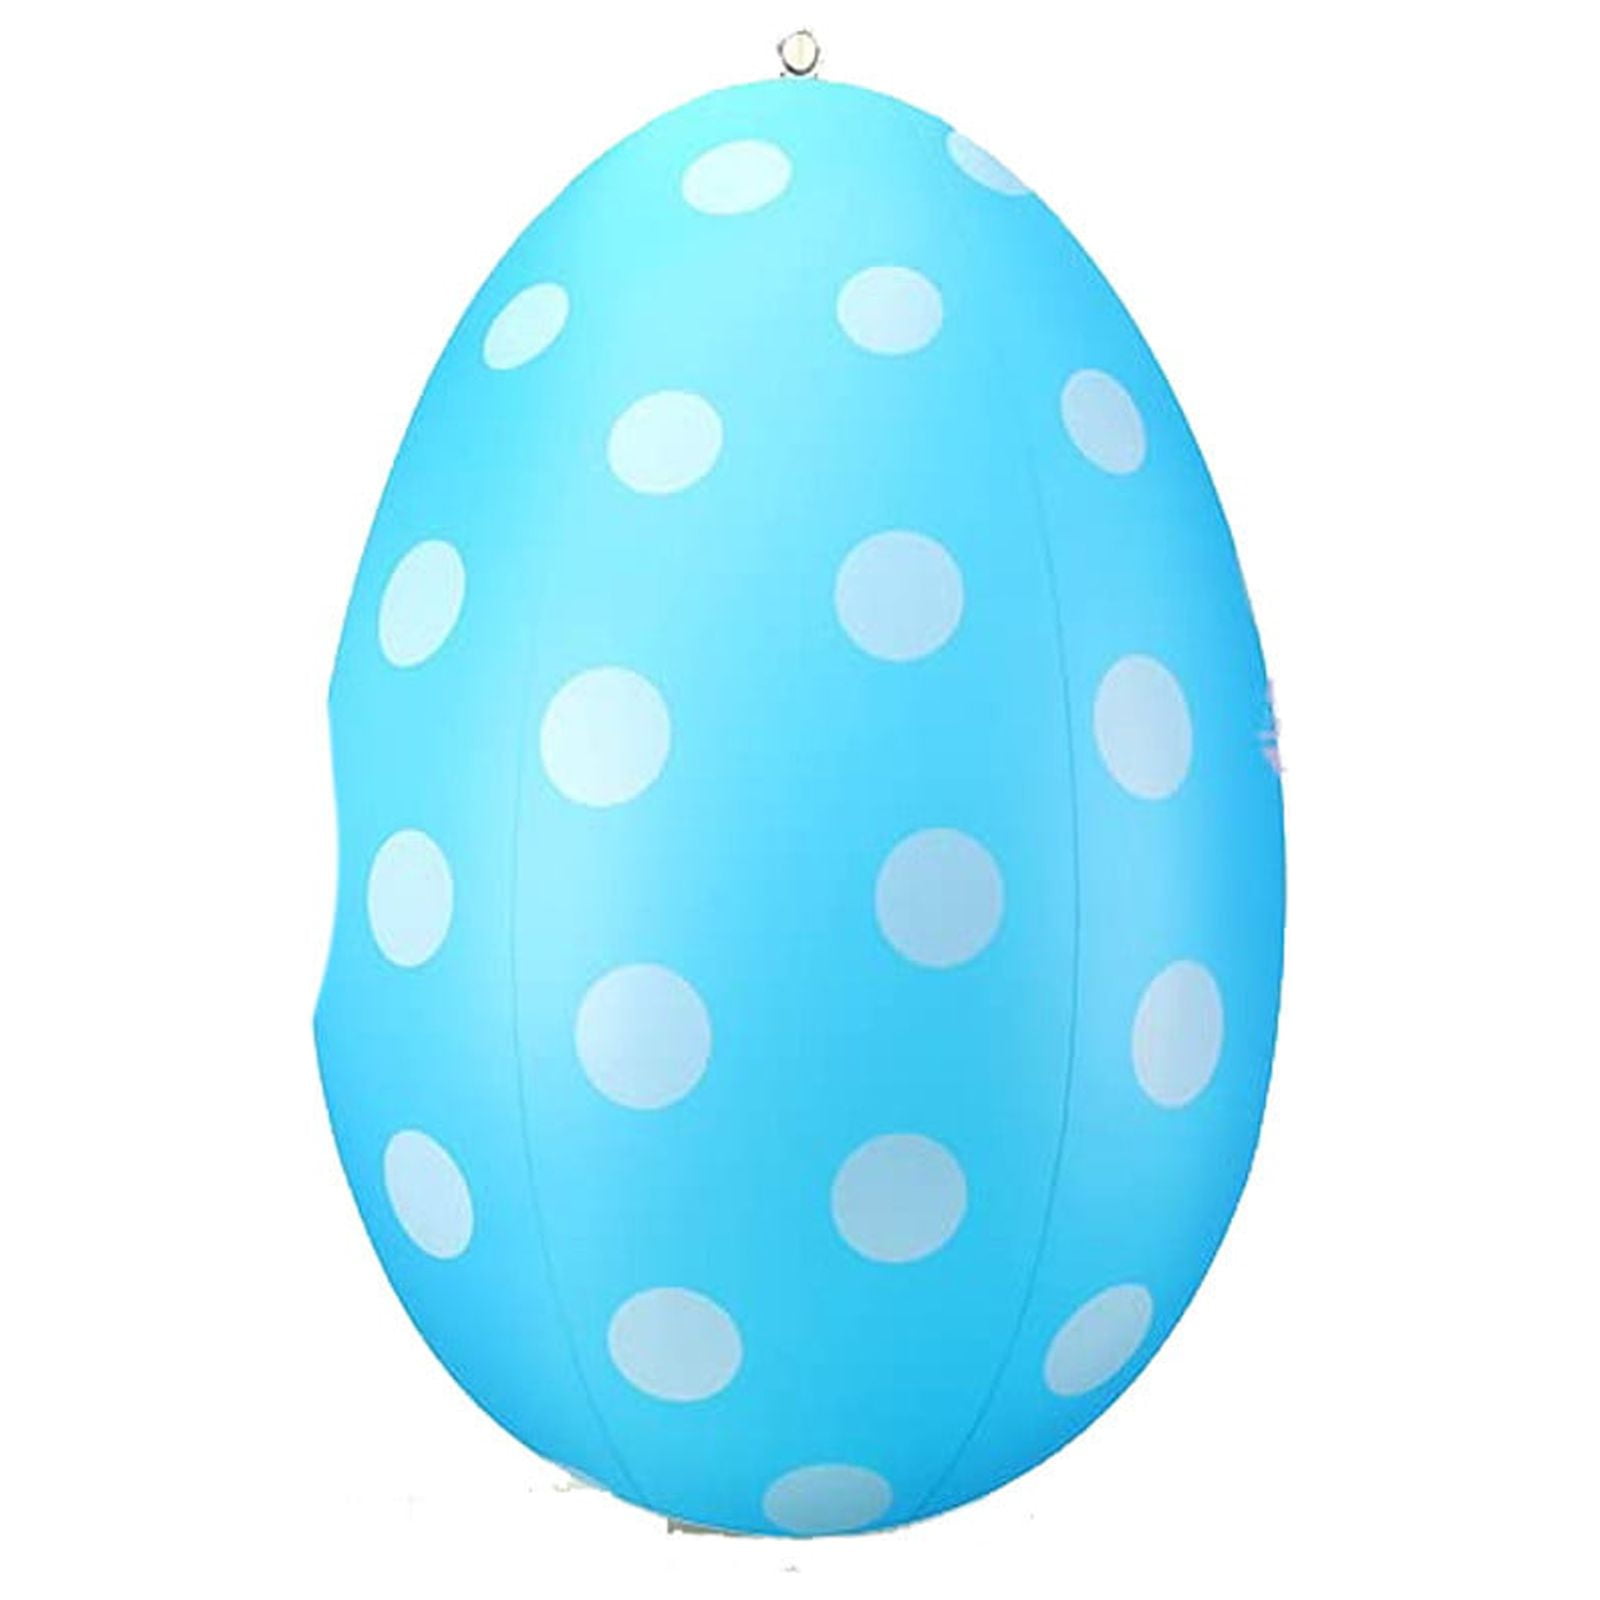 Henpk Clearance Under 5 Christmas Decor Inflatable Easter Eggs Outdoor ...